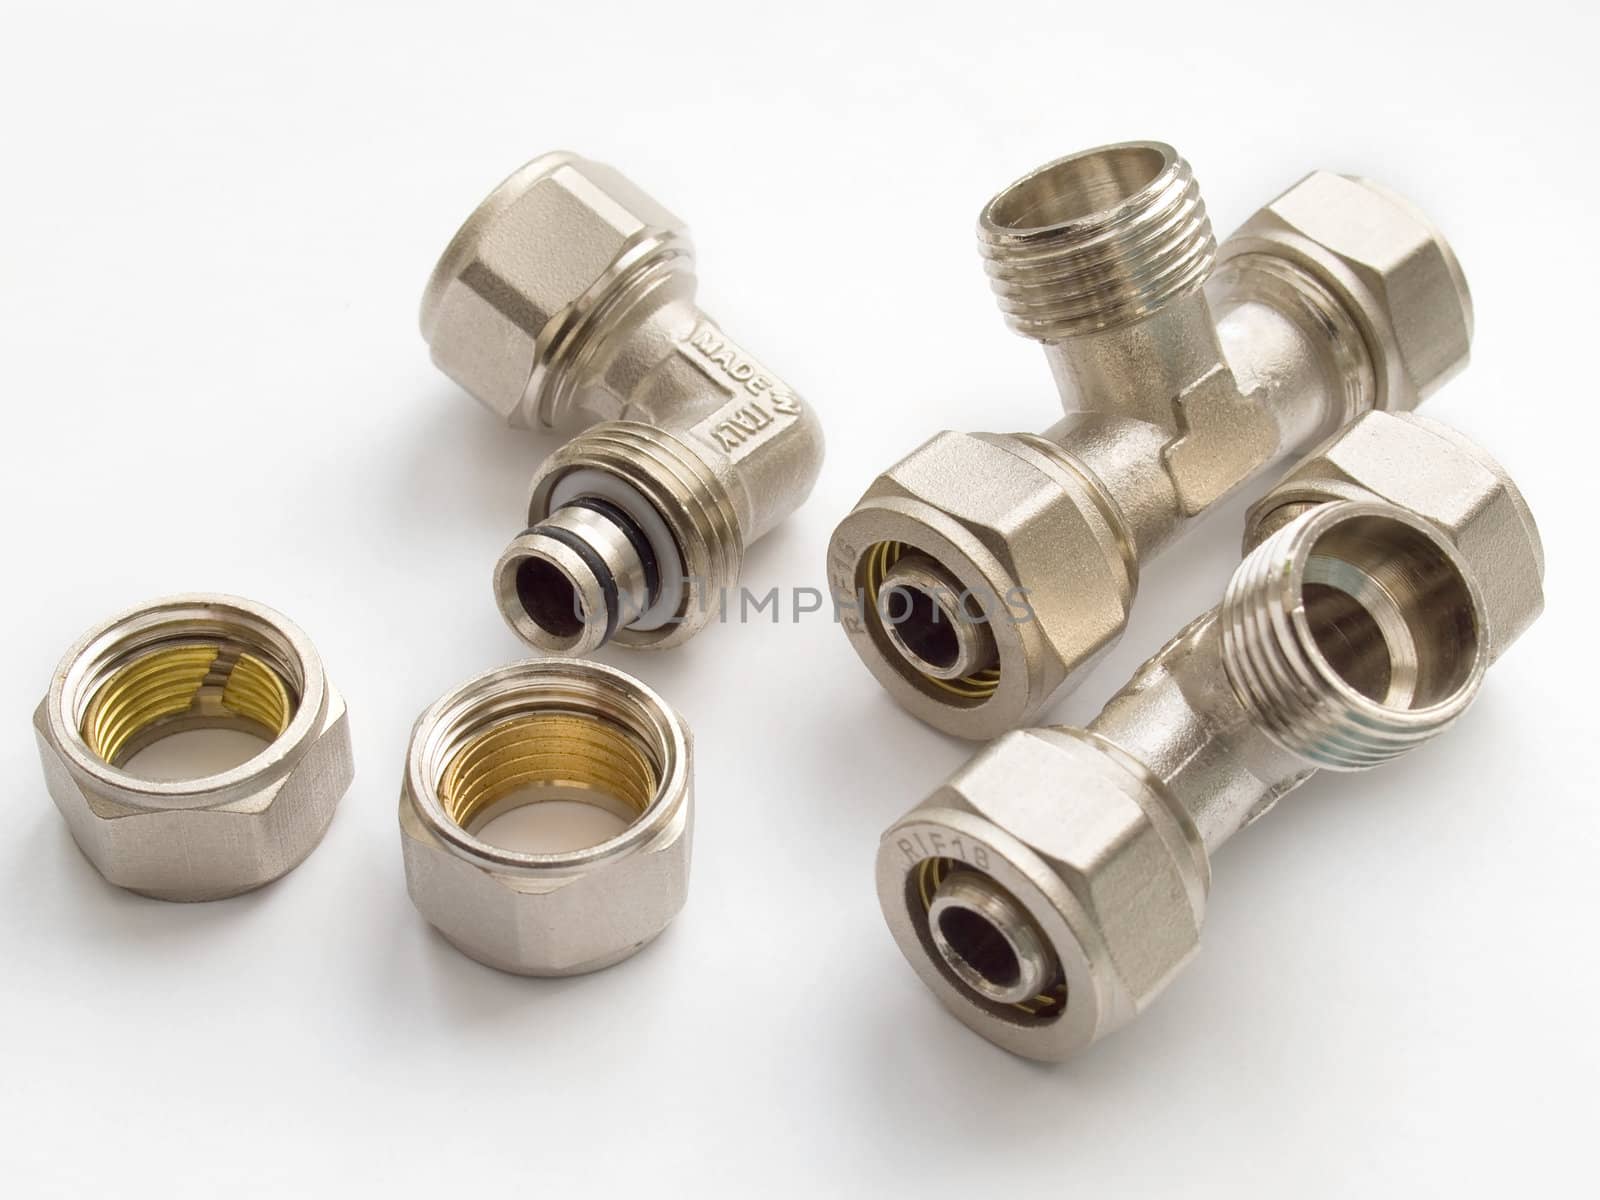 Waterpipe connectors on white background